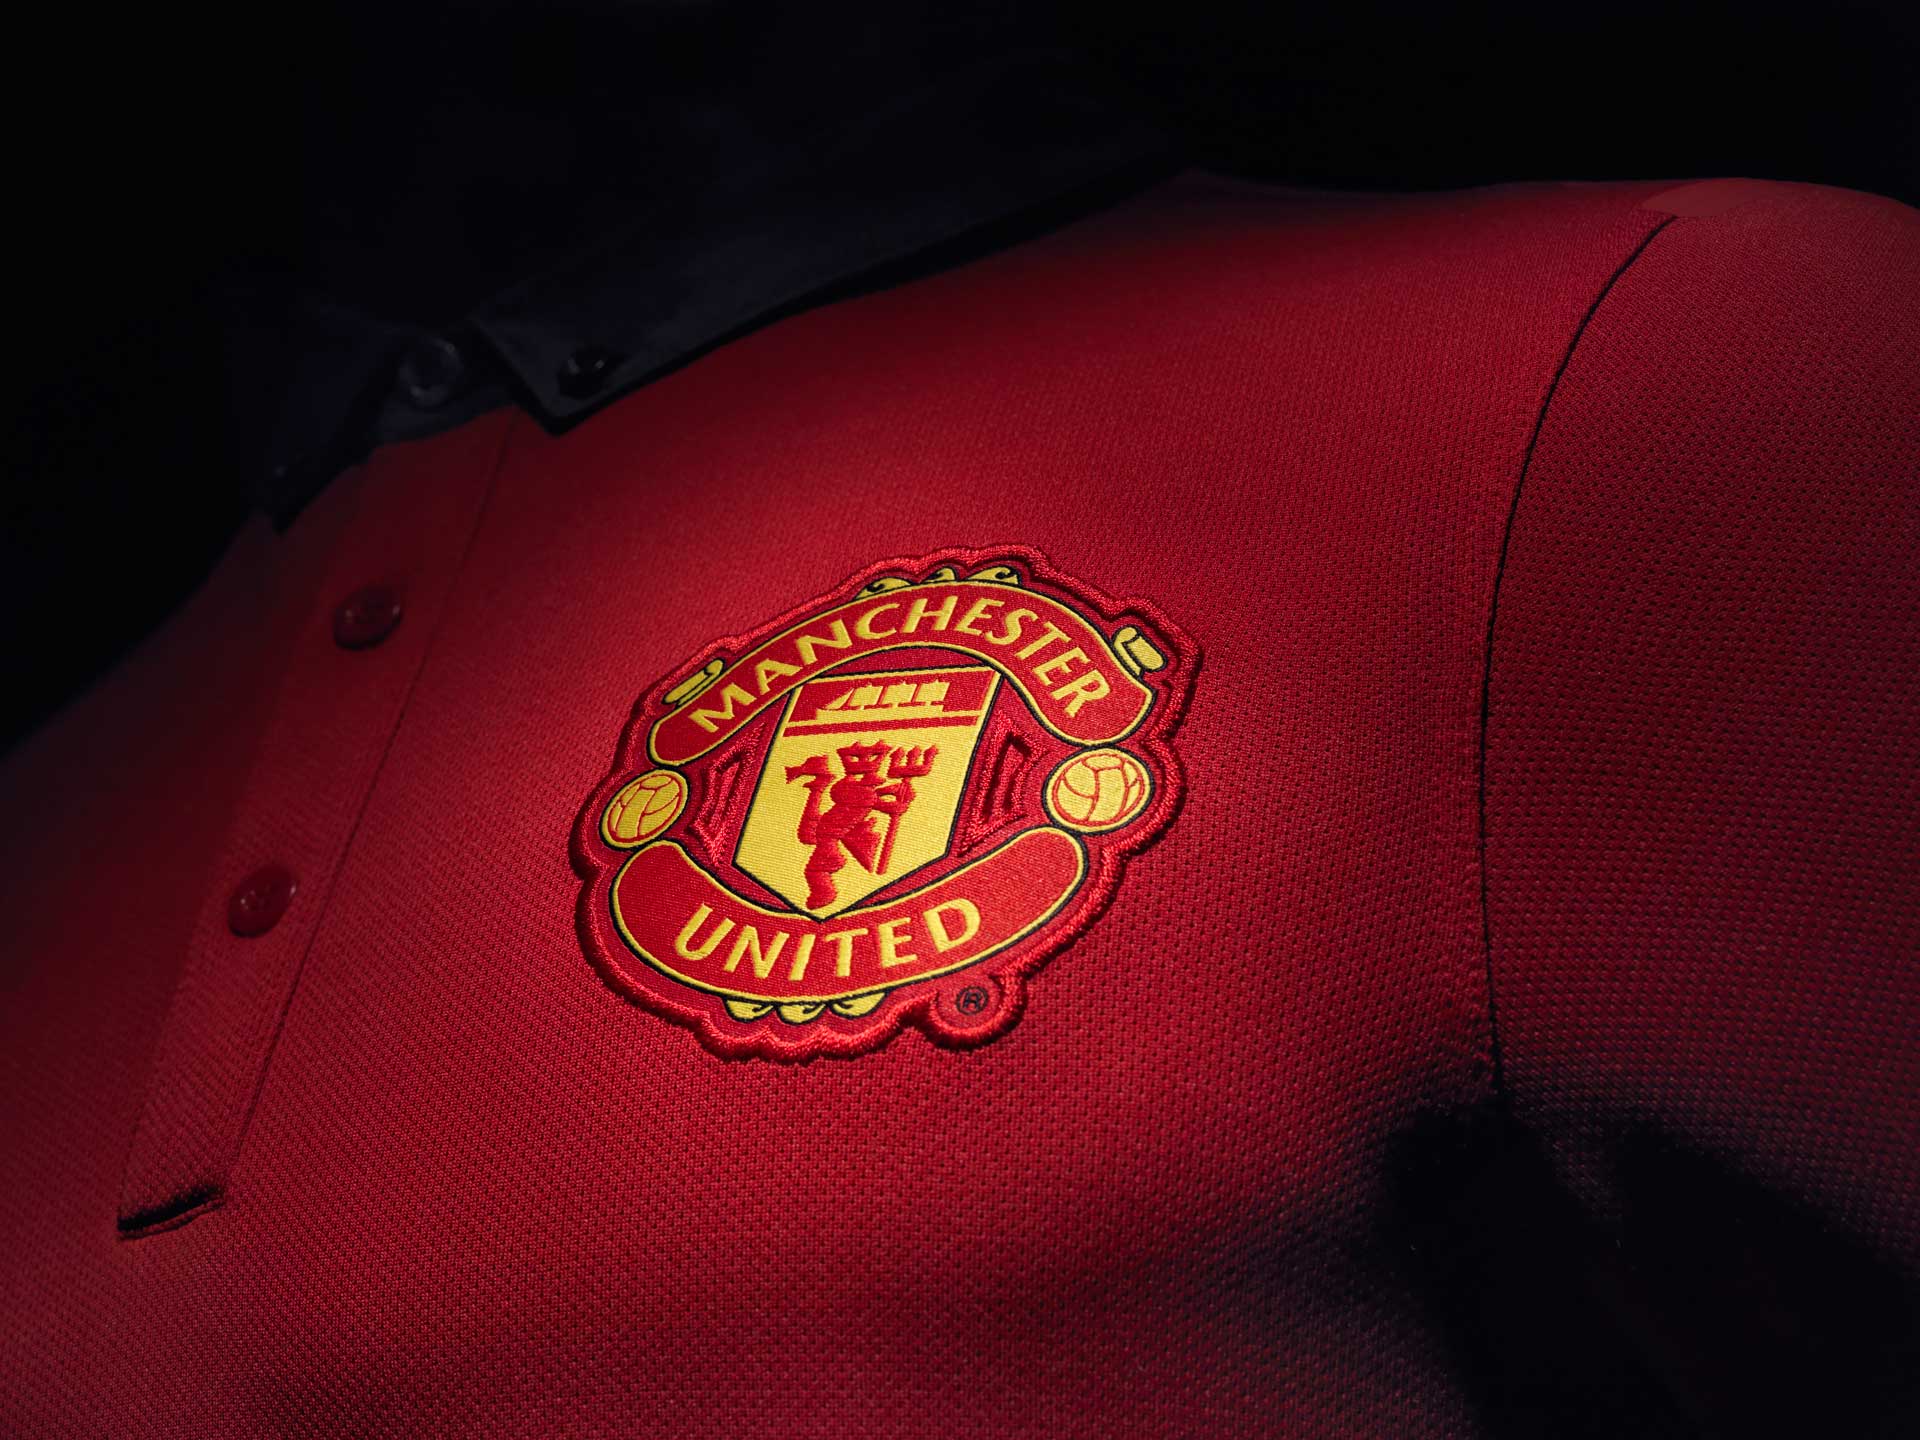 Manchester United crest logo in the jersey 2014 2015 wallpaper